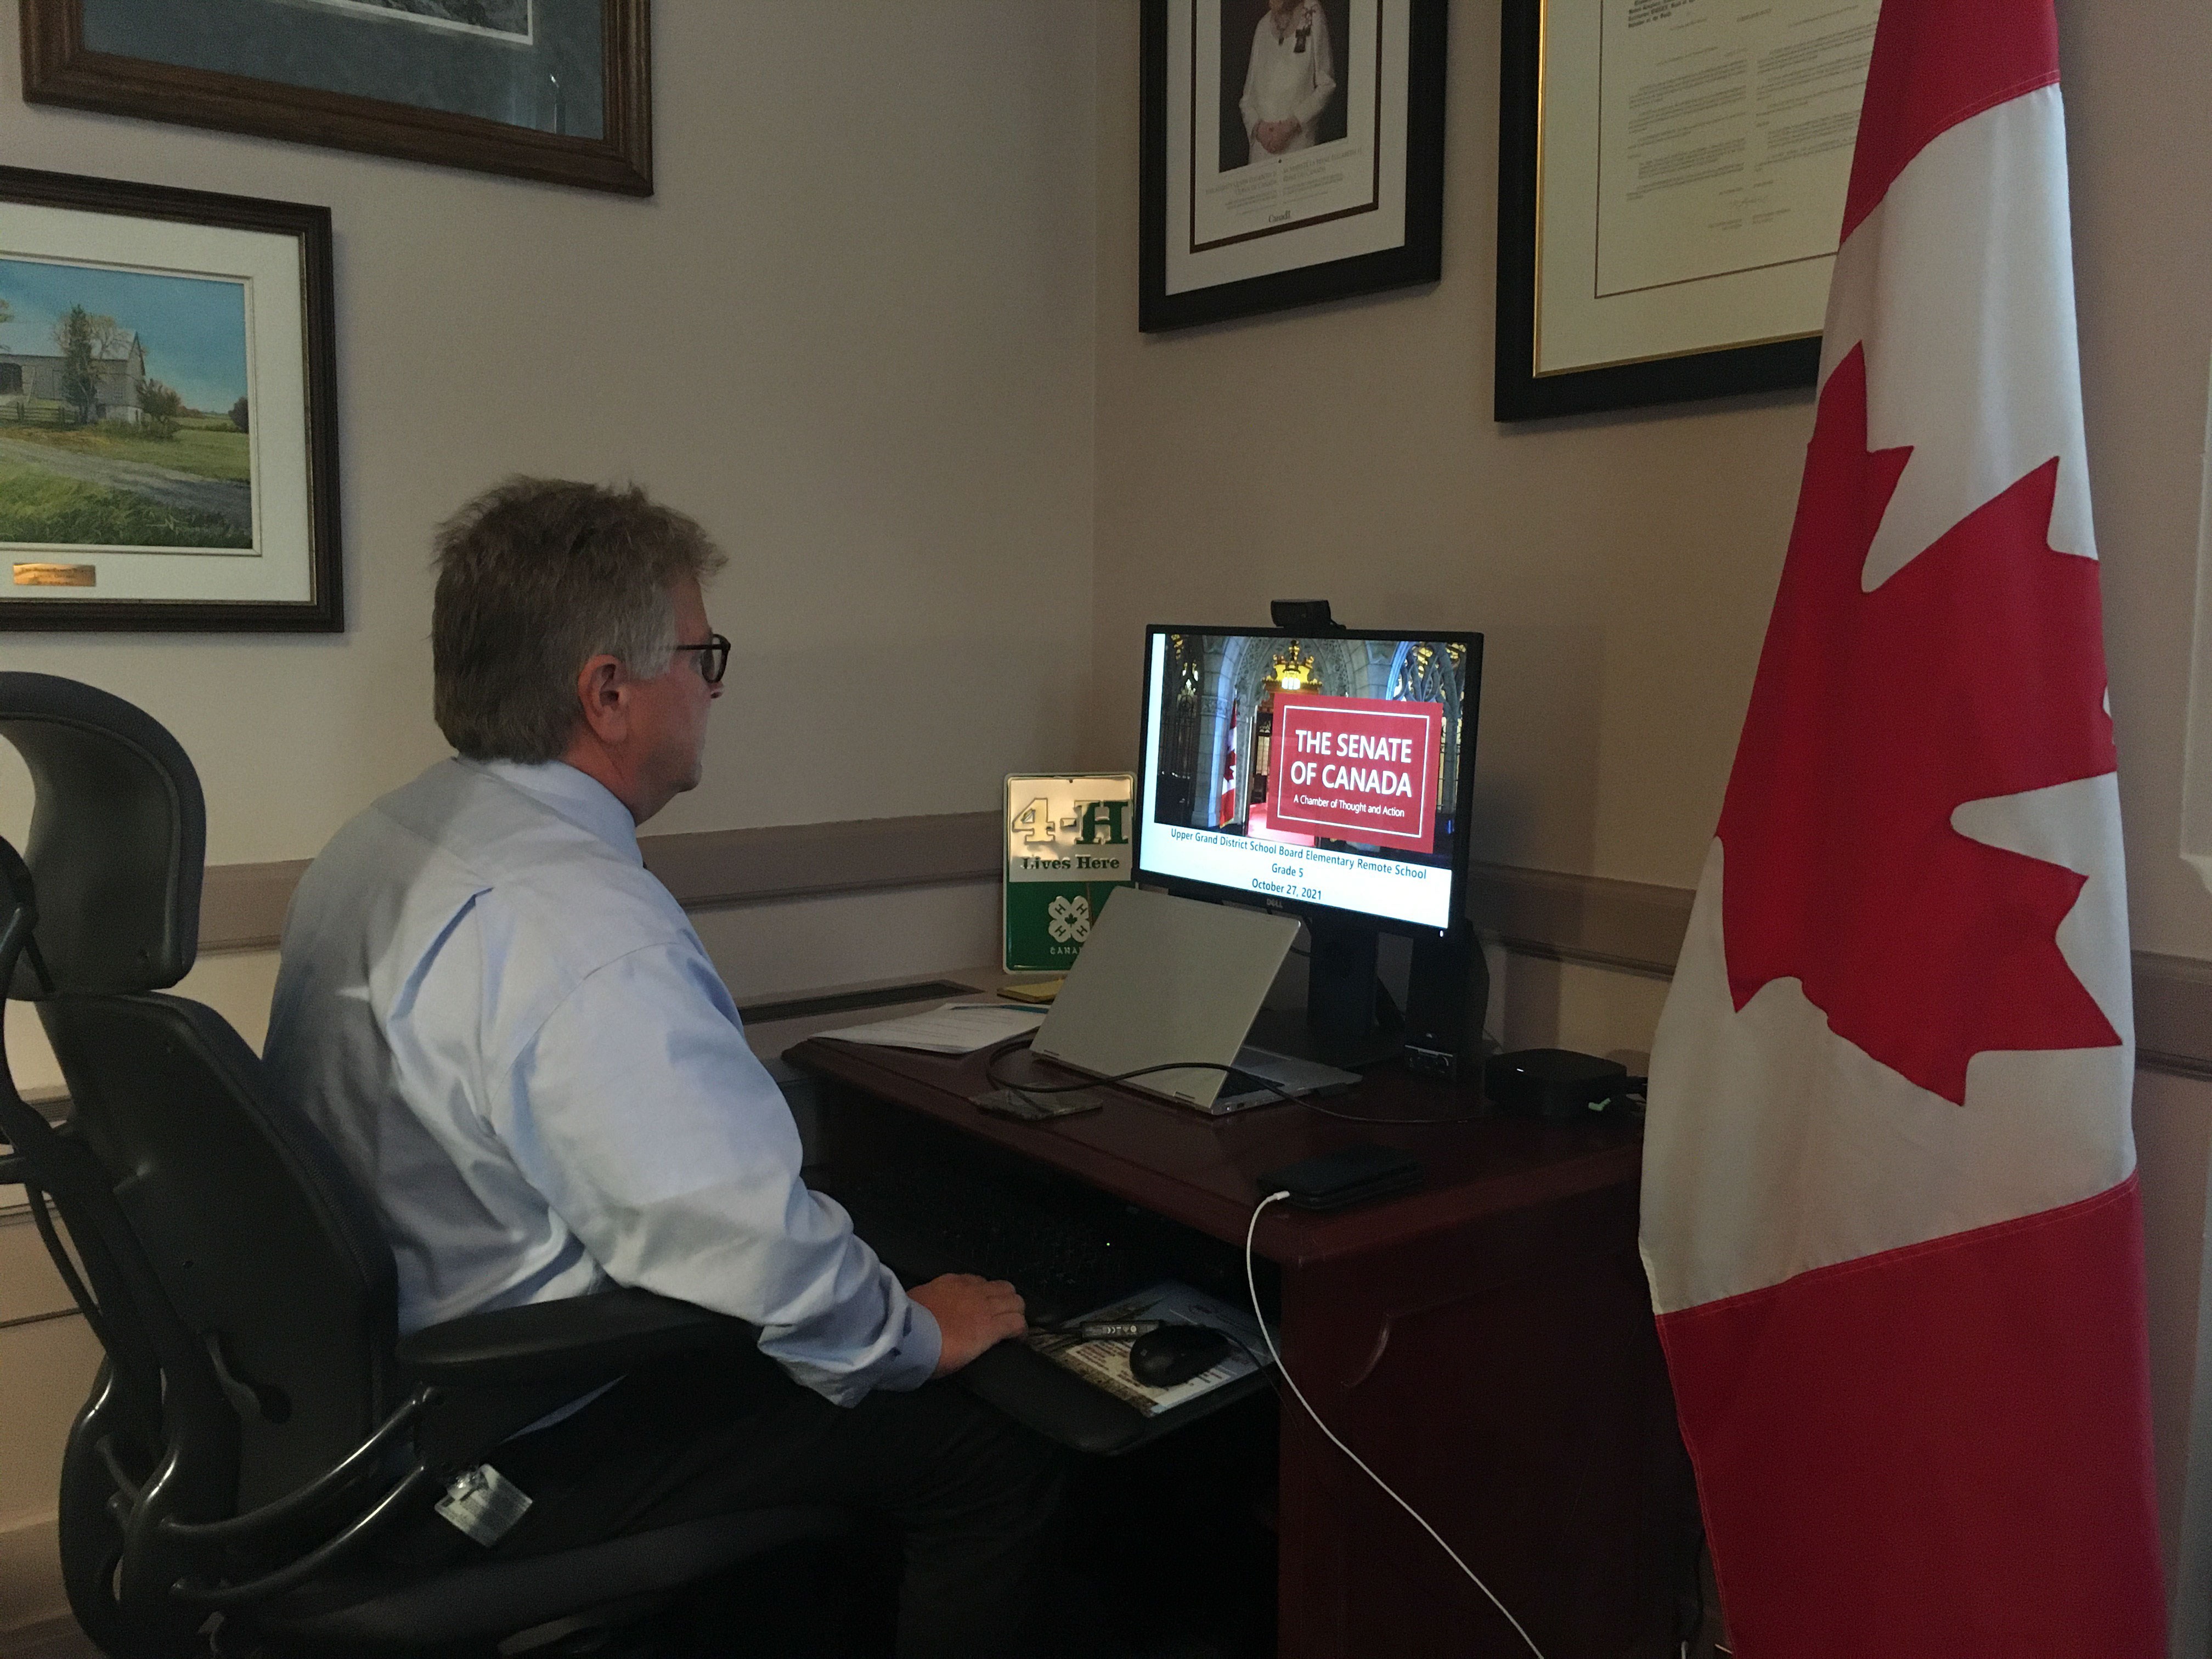 Wednesday, October 27, 2021 – Senator Robert Black meets virtually with a group of Grade 5 students in the UGDSB Elementary Remote Program in Guelph, Ontario. He explained his role as senator and highlighted how he supports Canadians and rural communities in the Red Chamber.